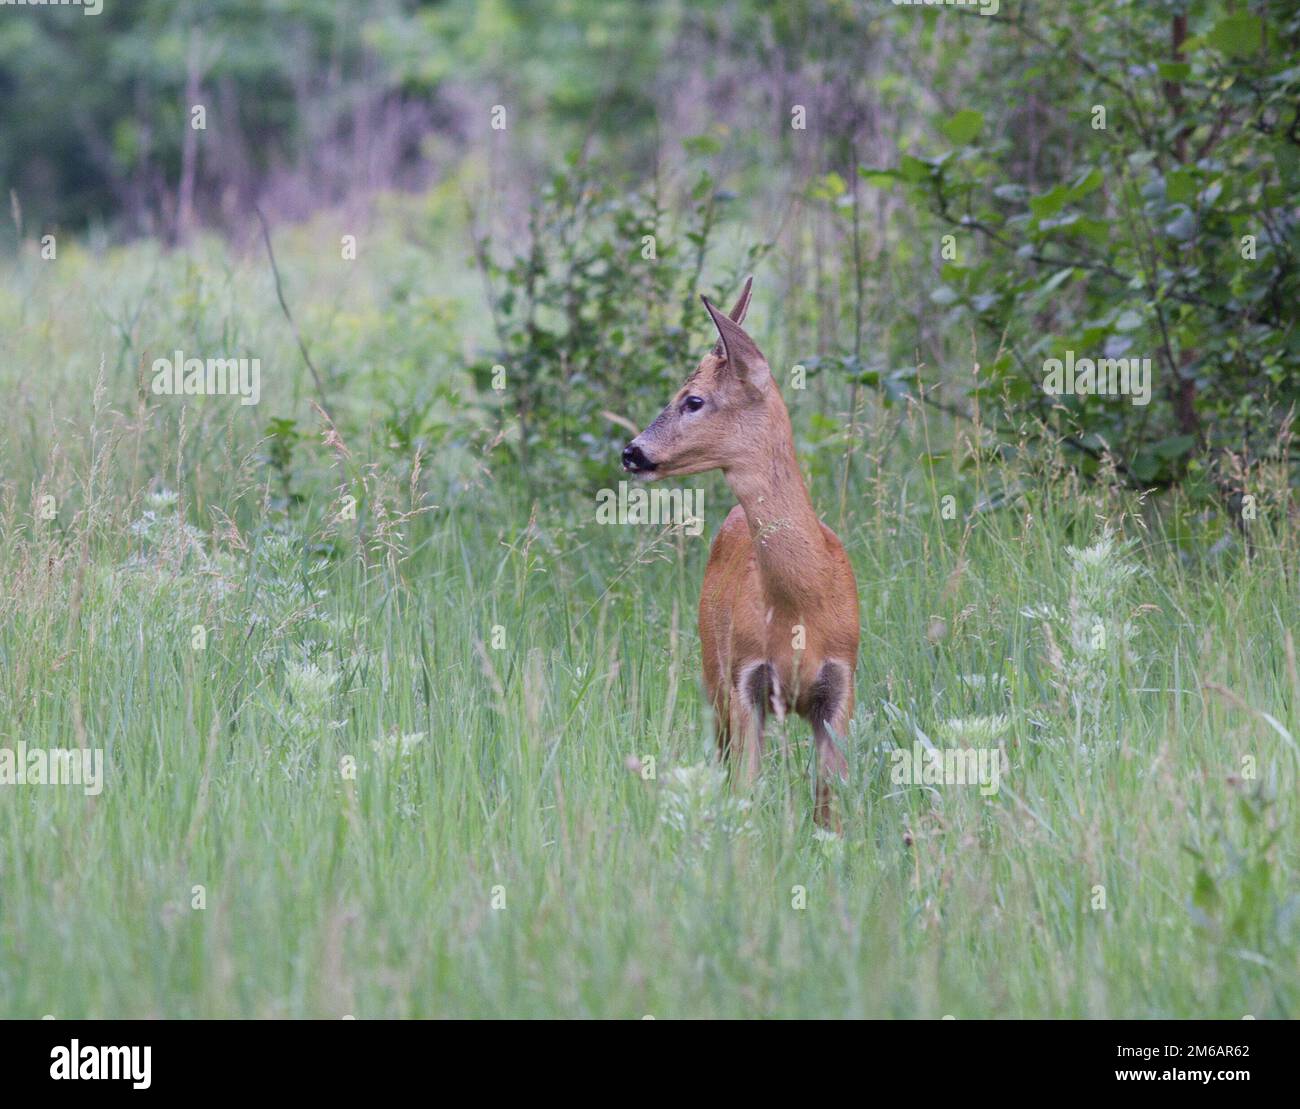 A young male deer. Stock Photo